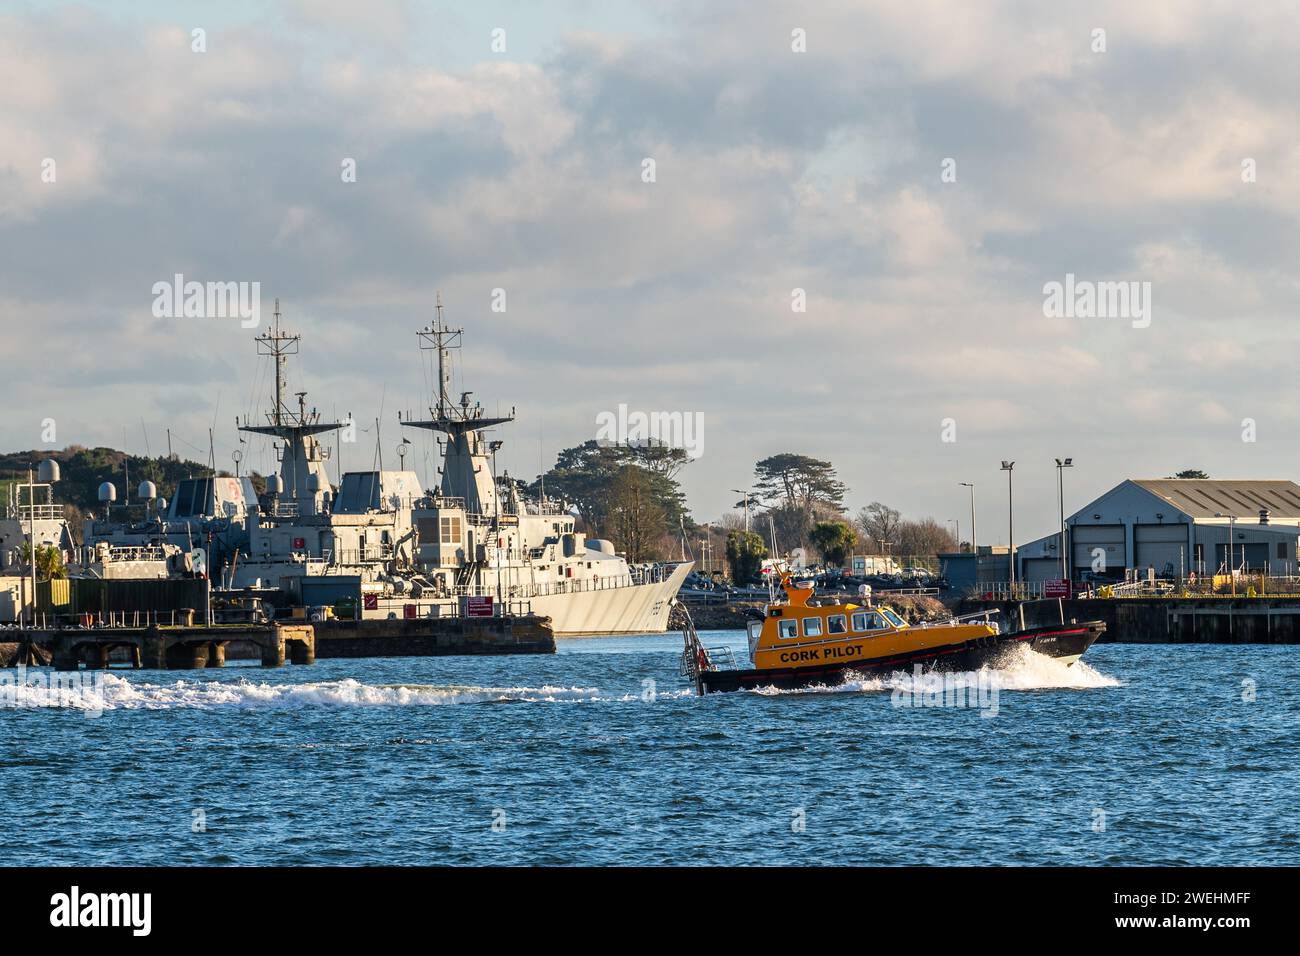 Cork Pilot Boat 'Fáilte' passes moored warships at Haulbowline Navy Base in Cobh, Co. Cork, Ireland. Stock Photo